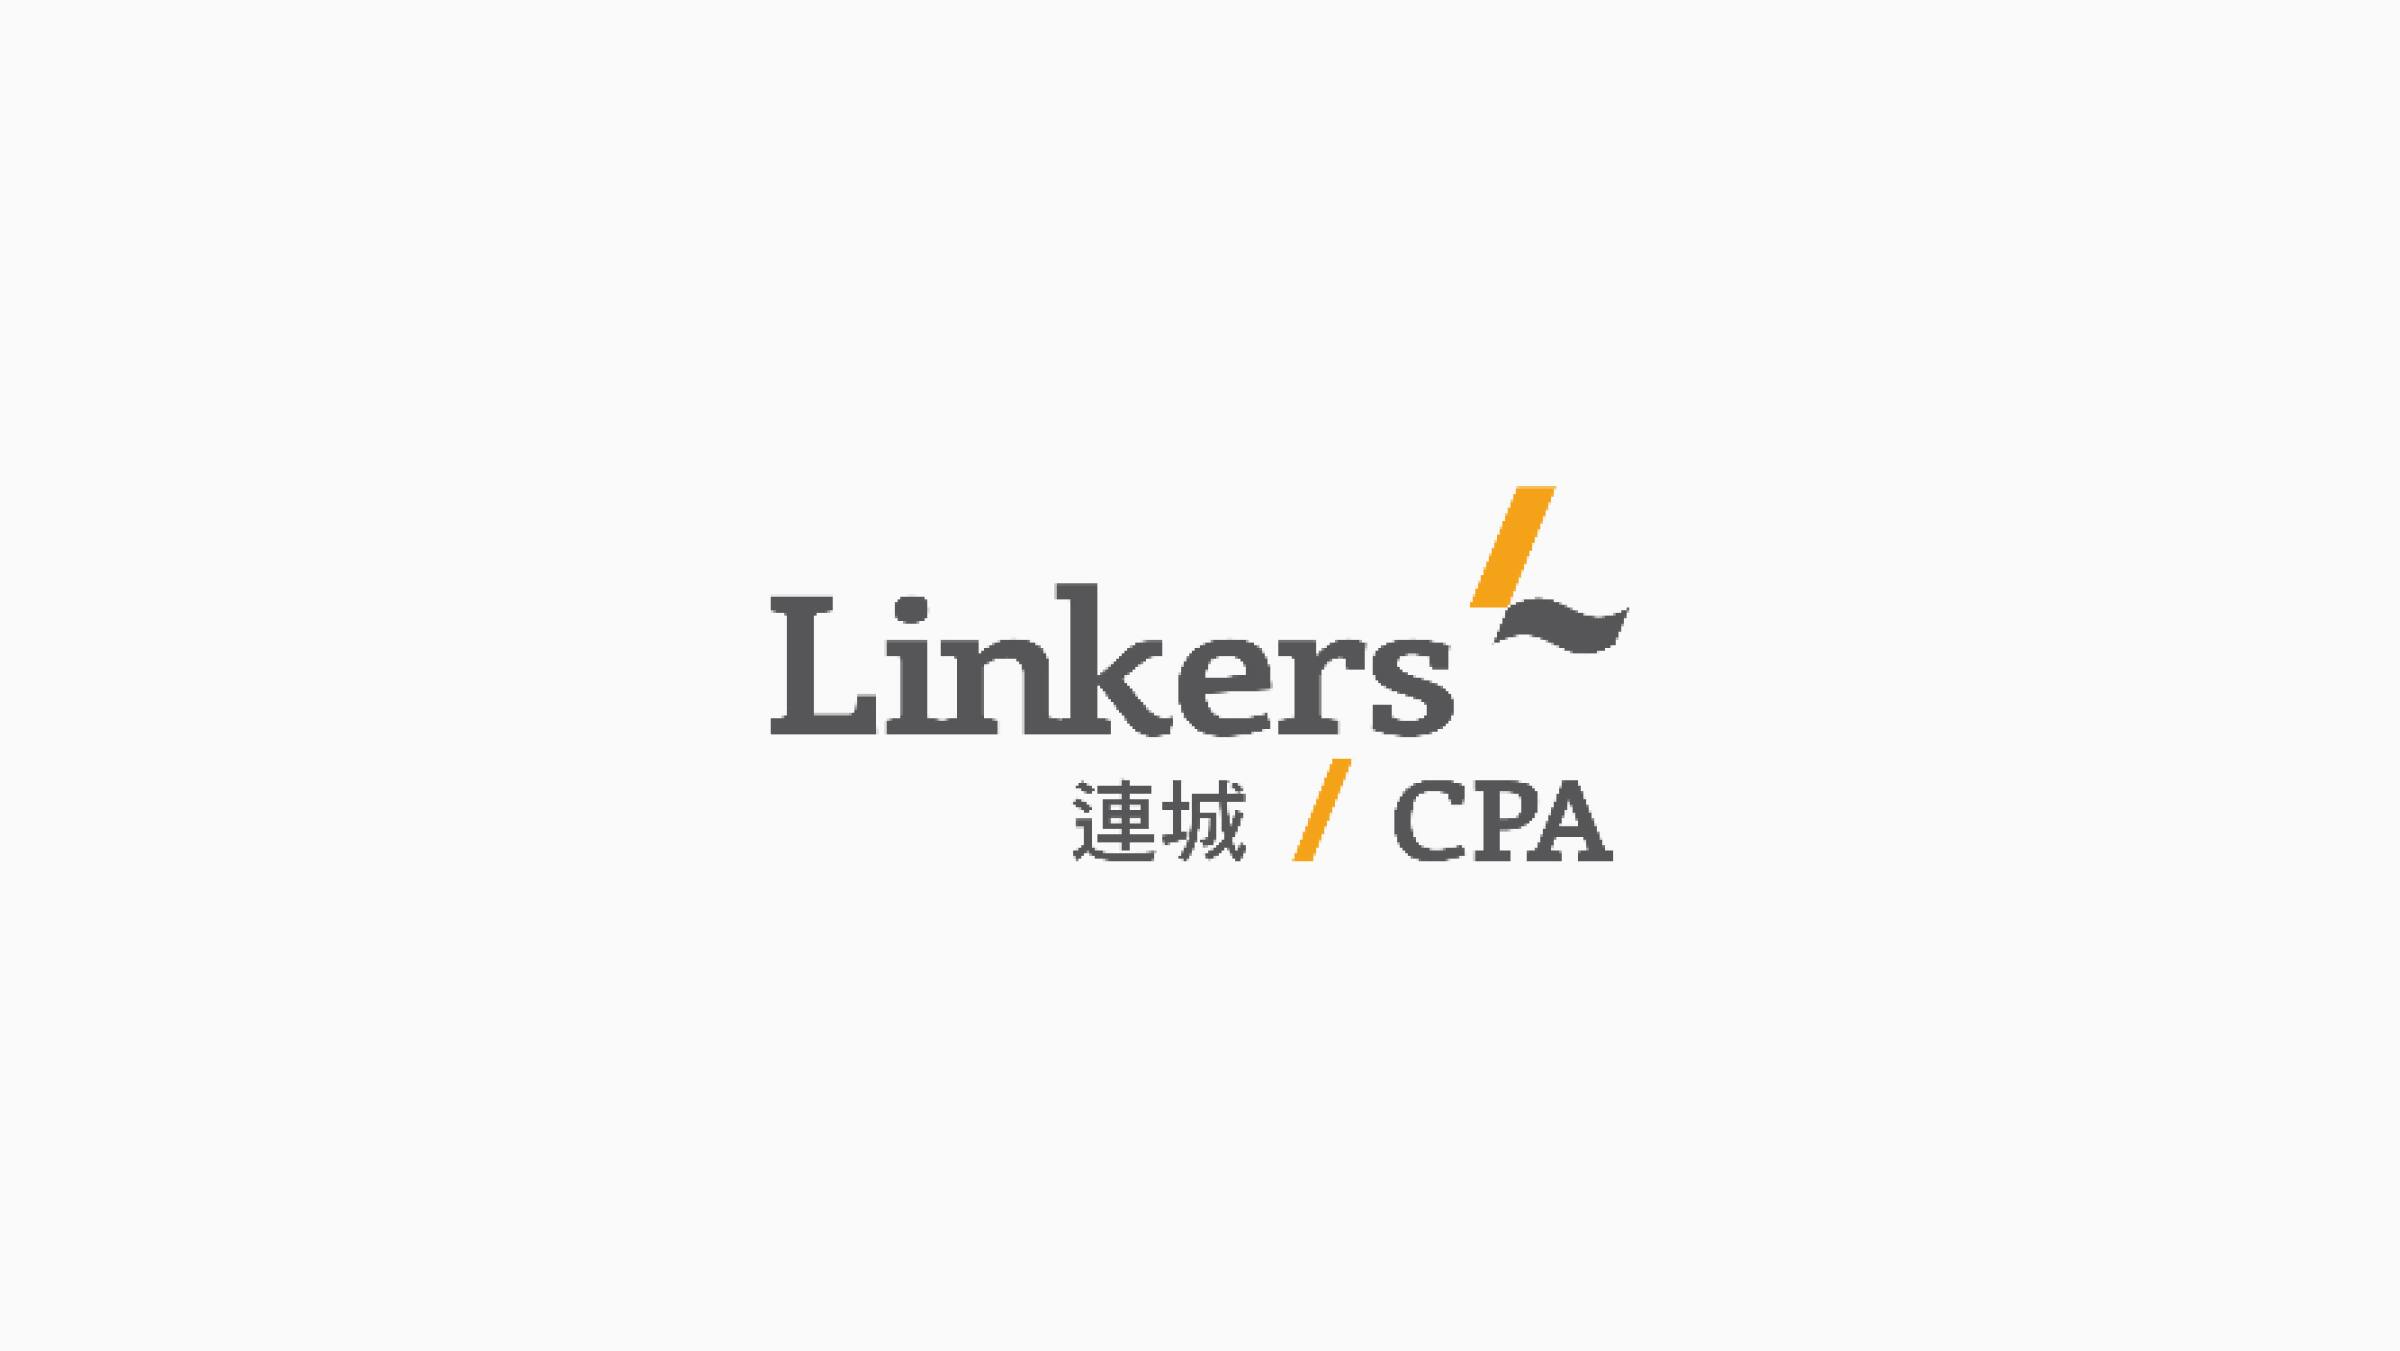 The Linkers CPA logo